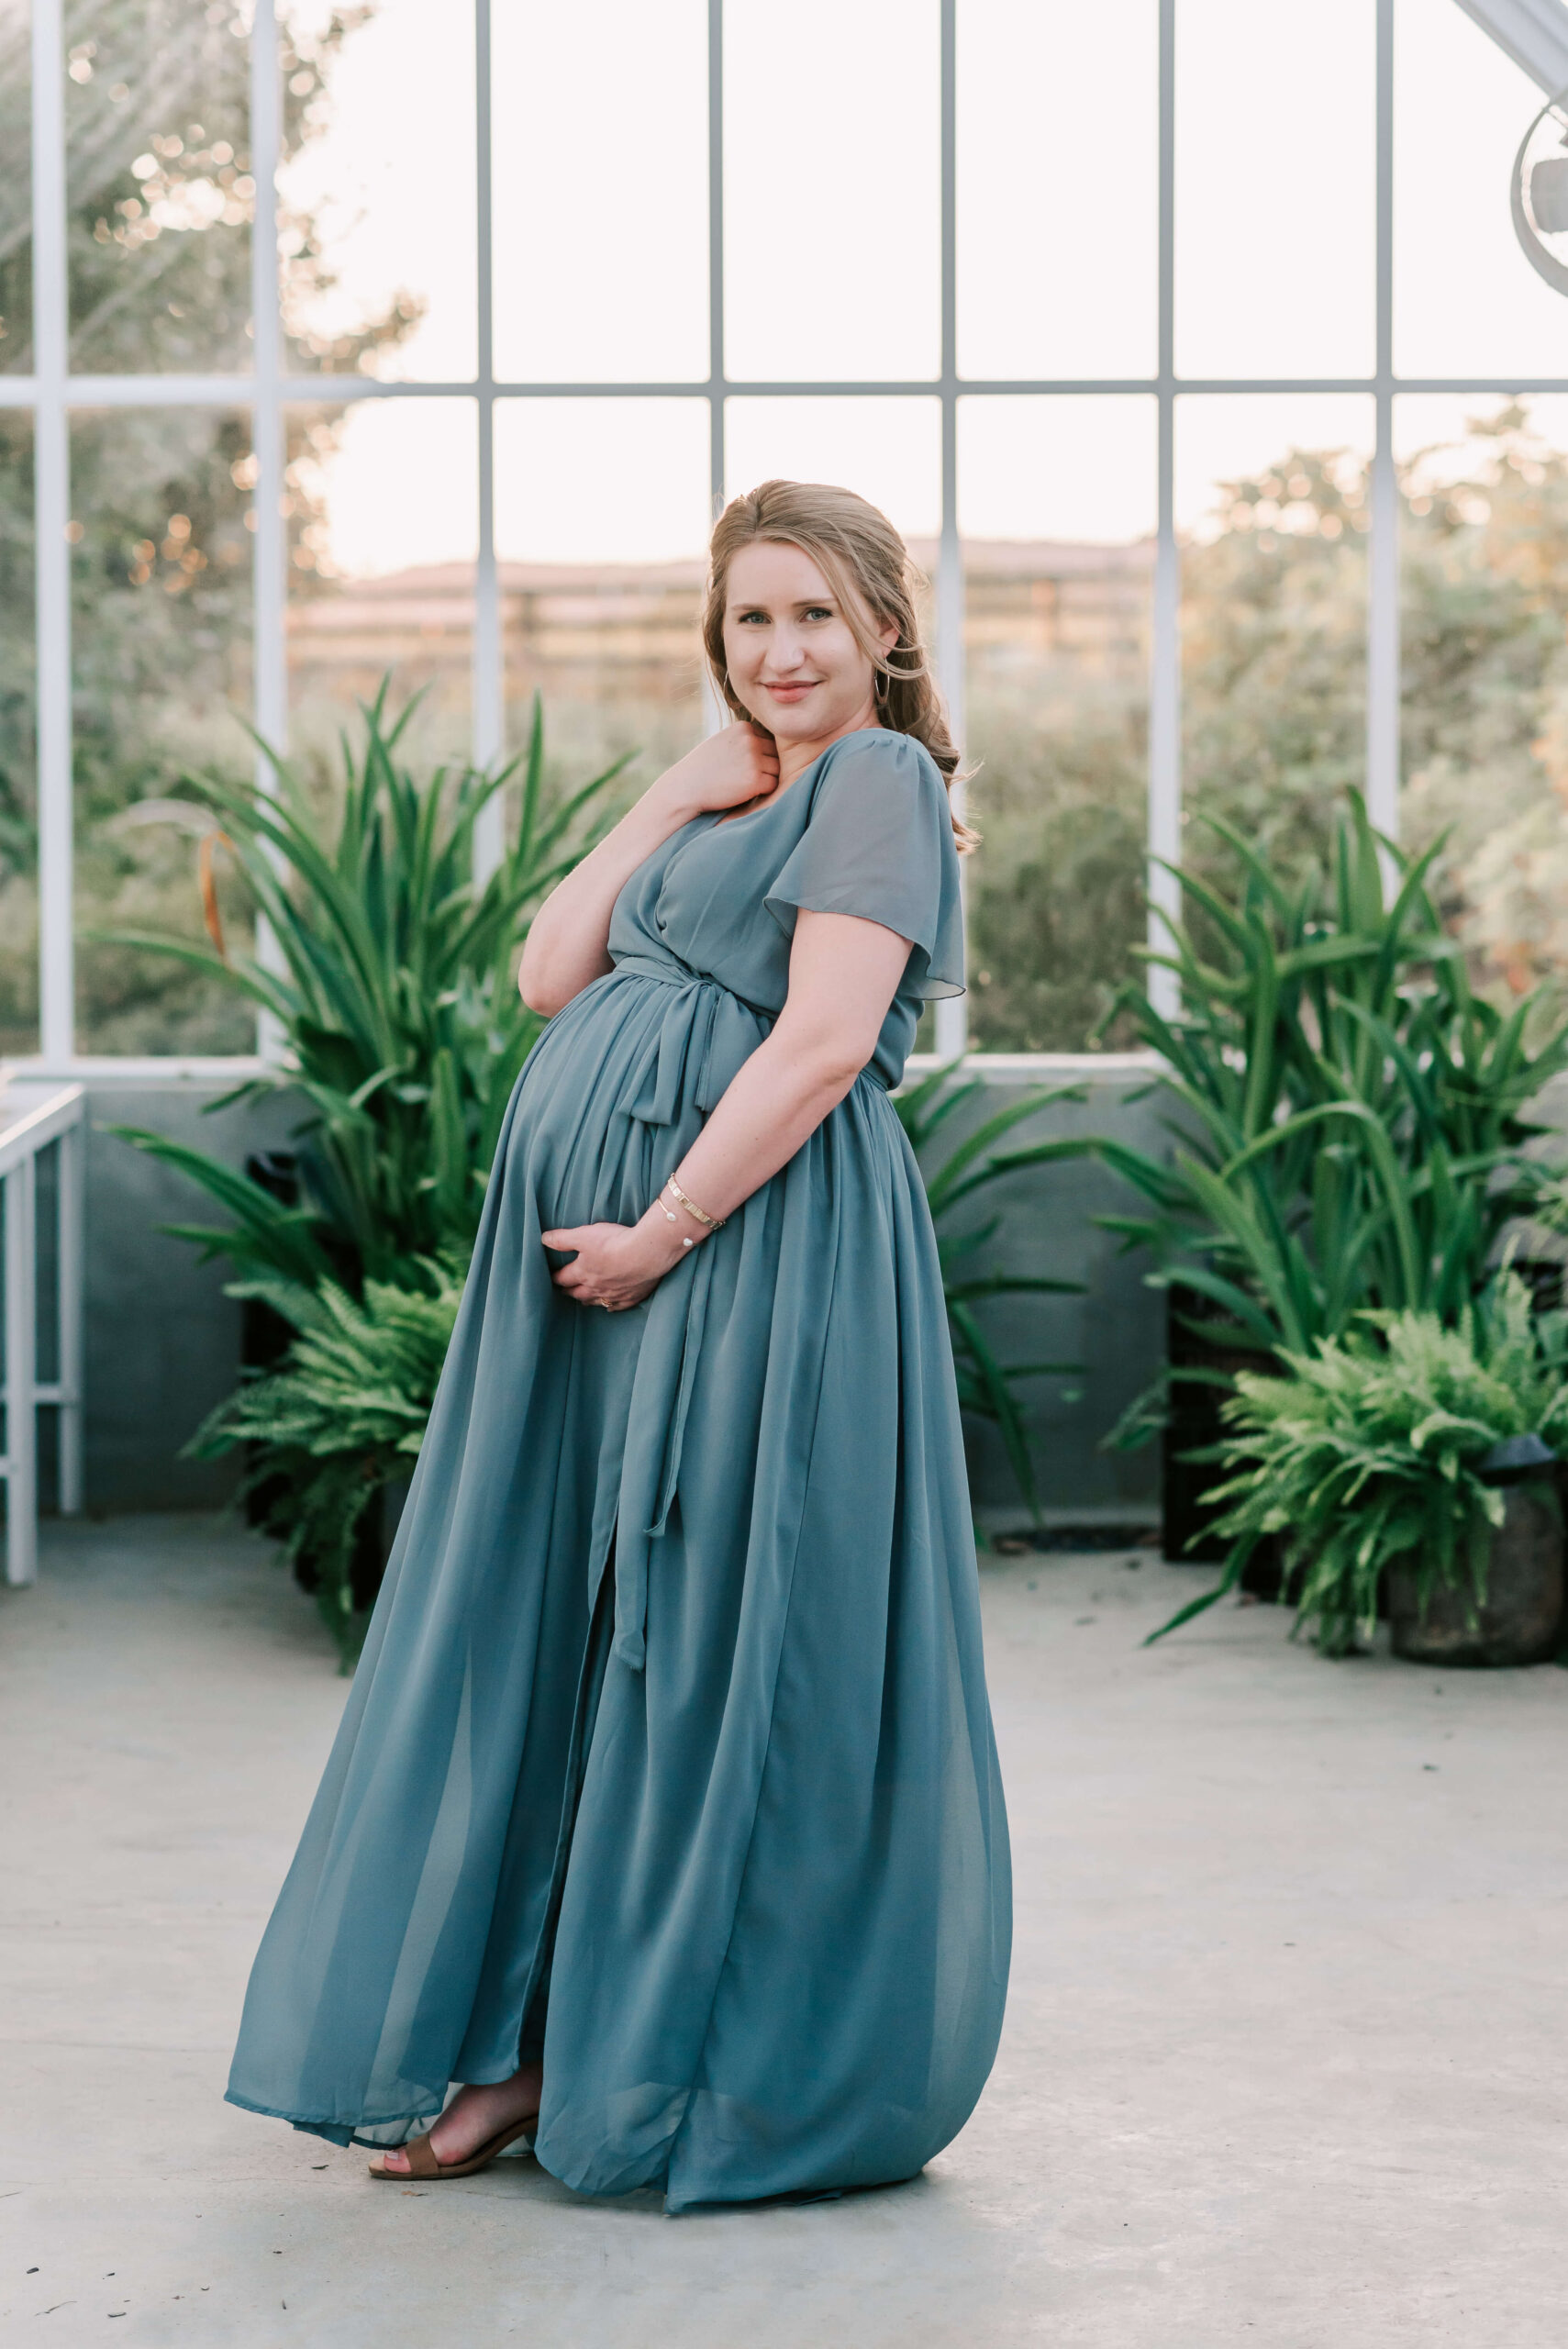 A mom to be holds her bump while standing in a green house wearing a blue maternity gown